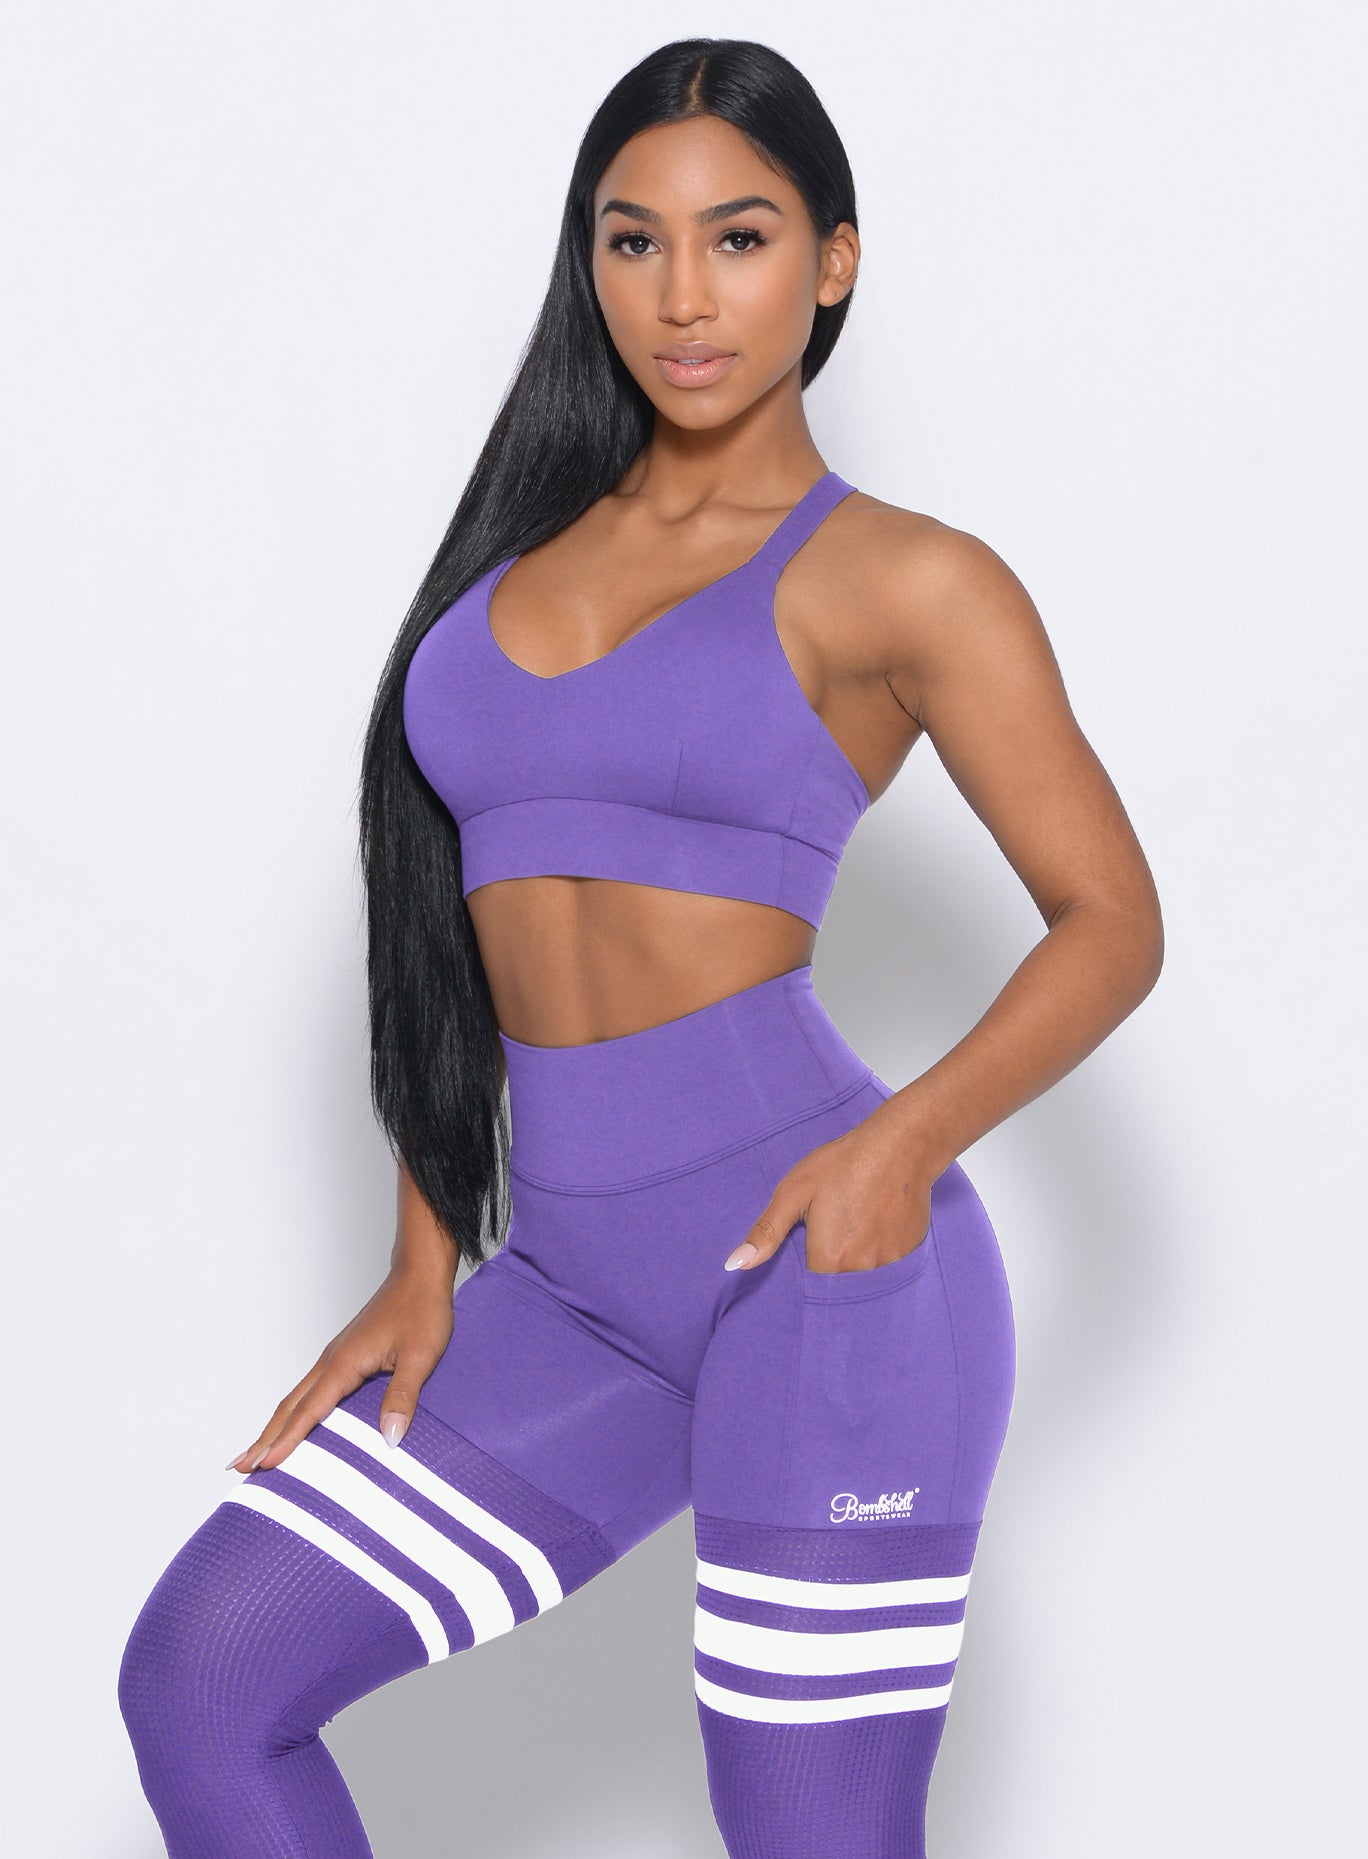 Left side view of the model angled left wearing our synergy sports bra in royal purple color and a matching leggings